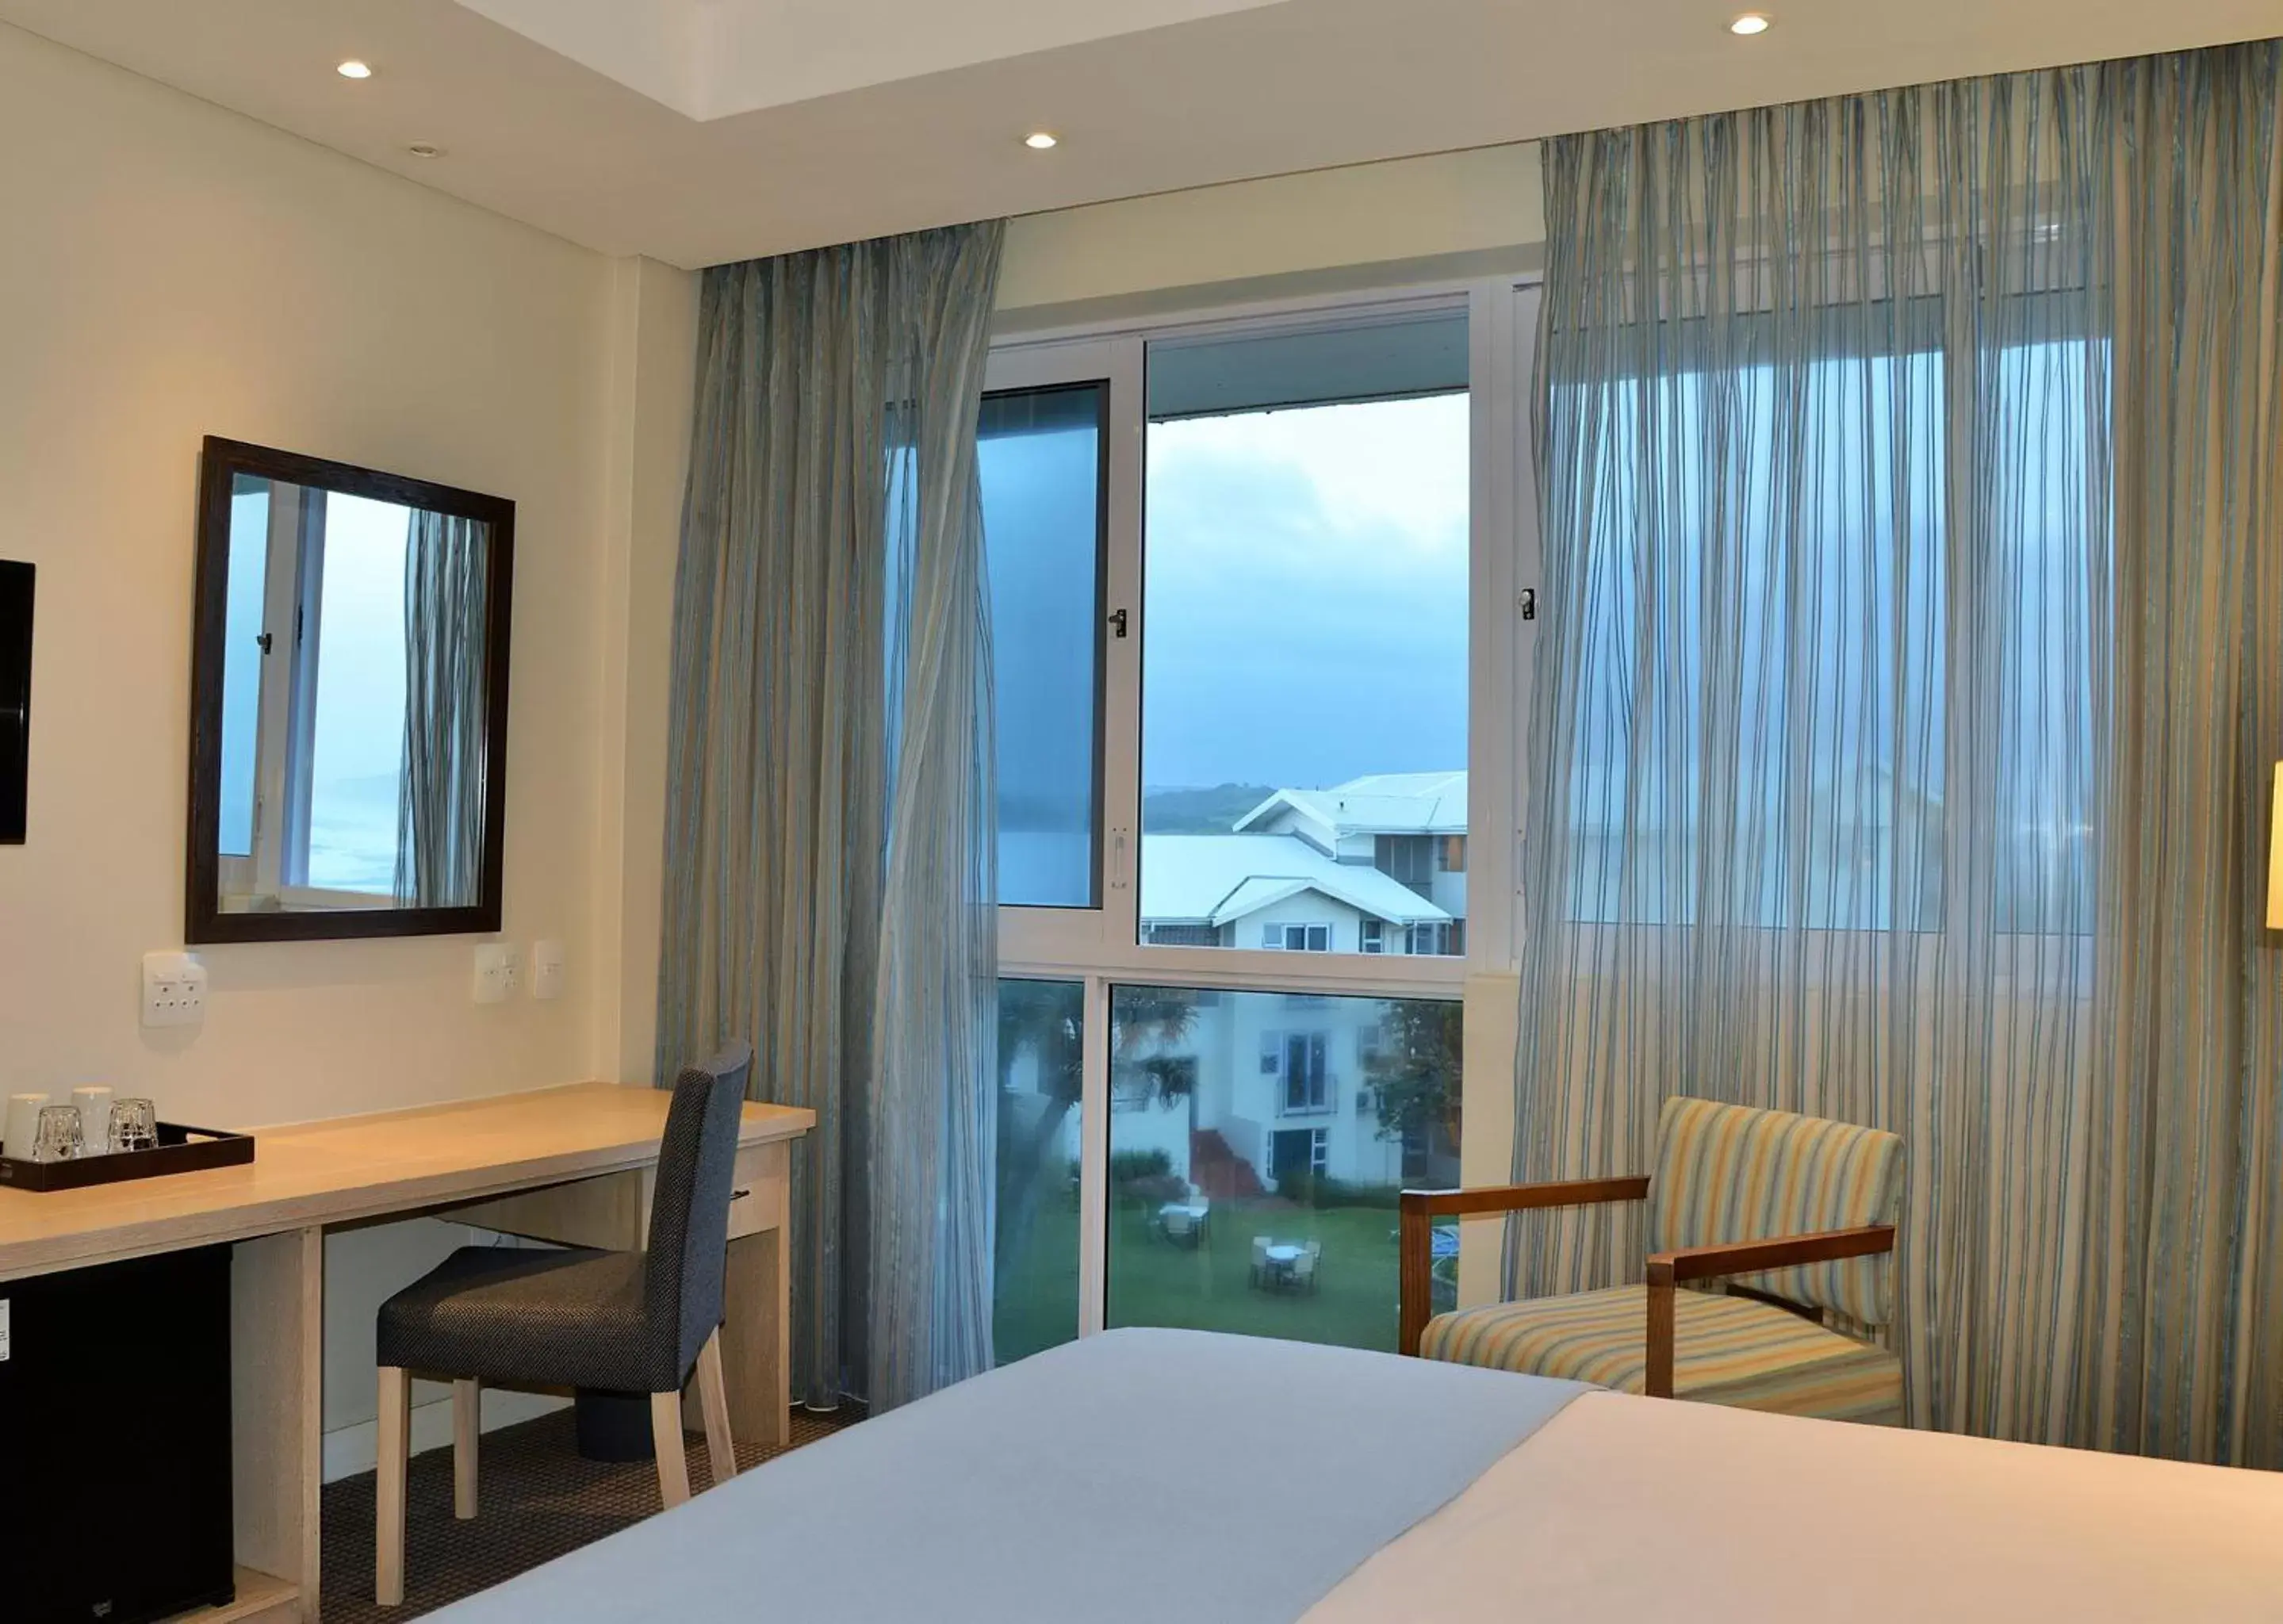 Bed in Blue Marlin Hotel by Dream Resorts